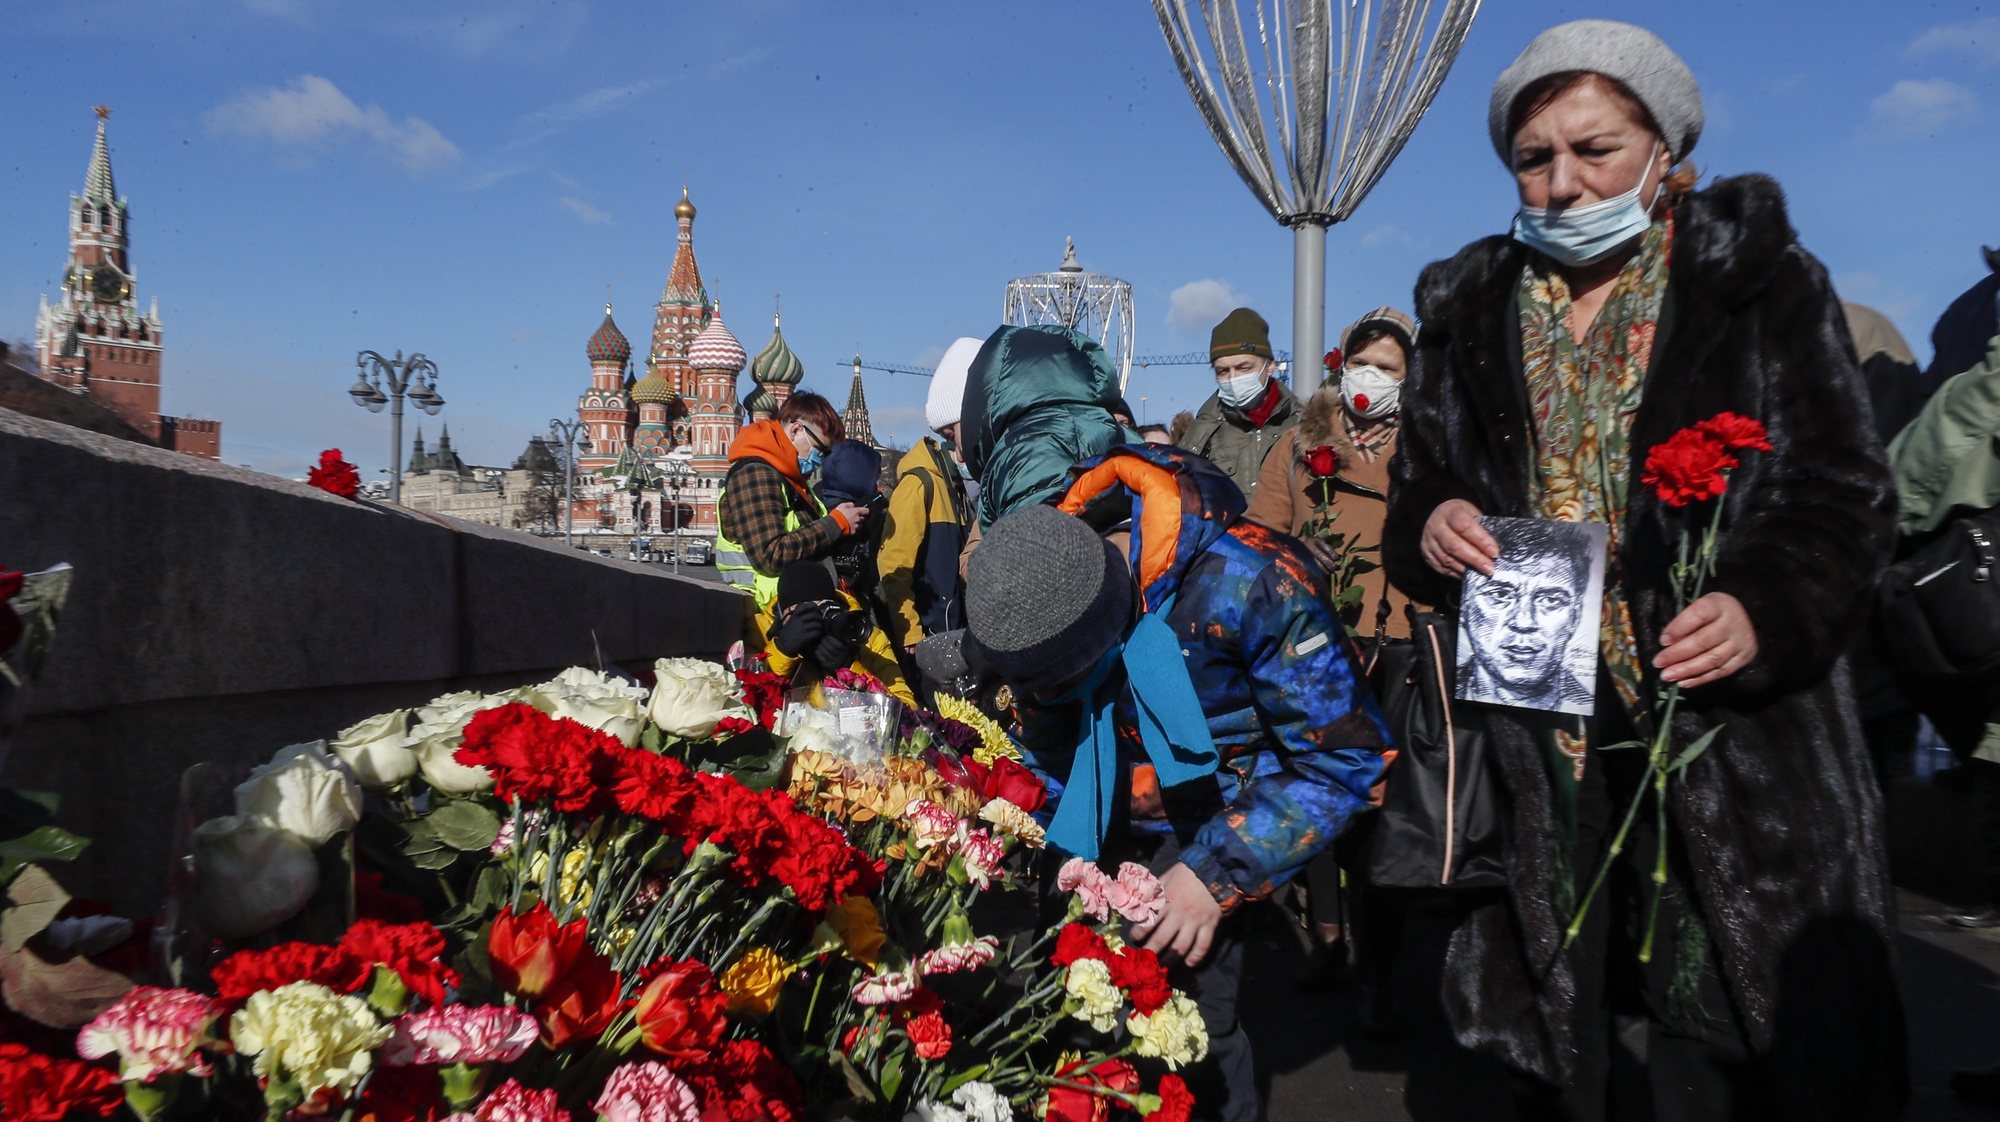 epa09039796 People lay flowers at the site where Russian opposition politician Boris Nemtsov died during an event marking the sixth anniversary of his assassination, in Moscow, Russia, 27 February 2021. Boris Nemtsov was killed on 27 February 2015 by suspected Chechen hitmen on a bridge in front of the Kremlin.  EPA/SERGEI ILNITSKY